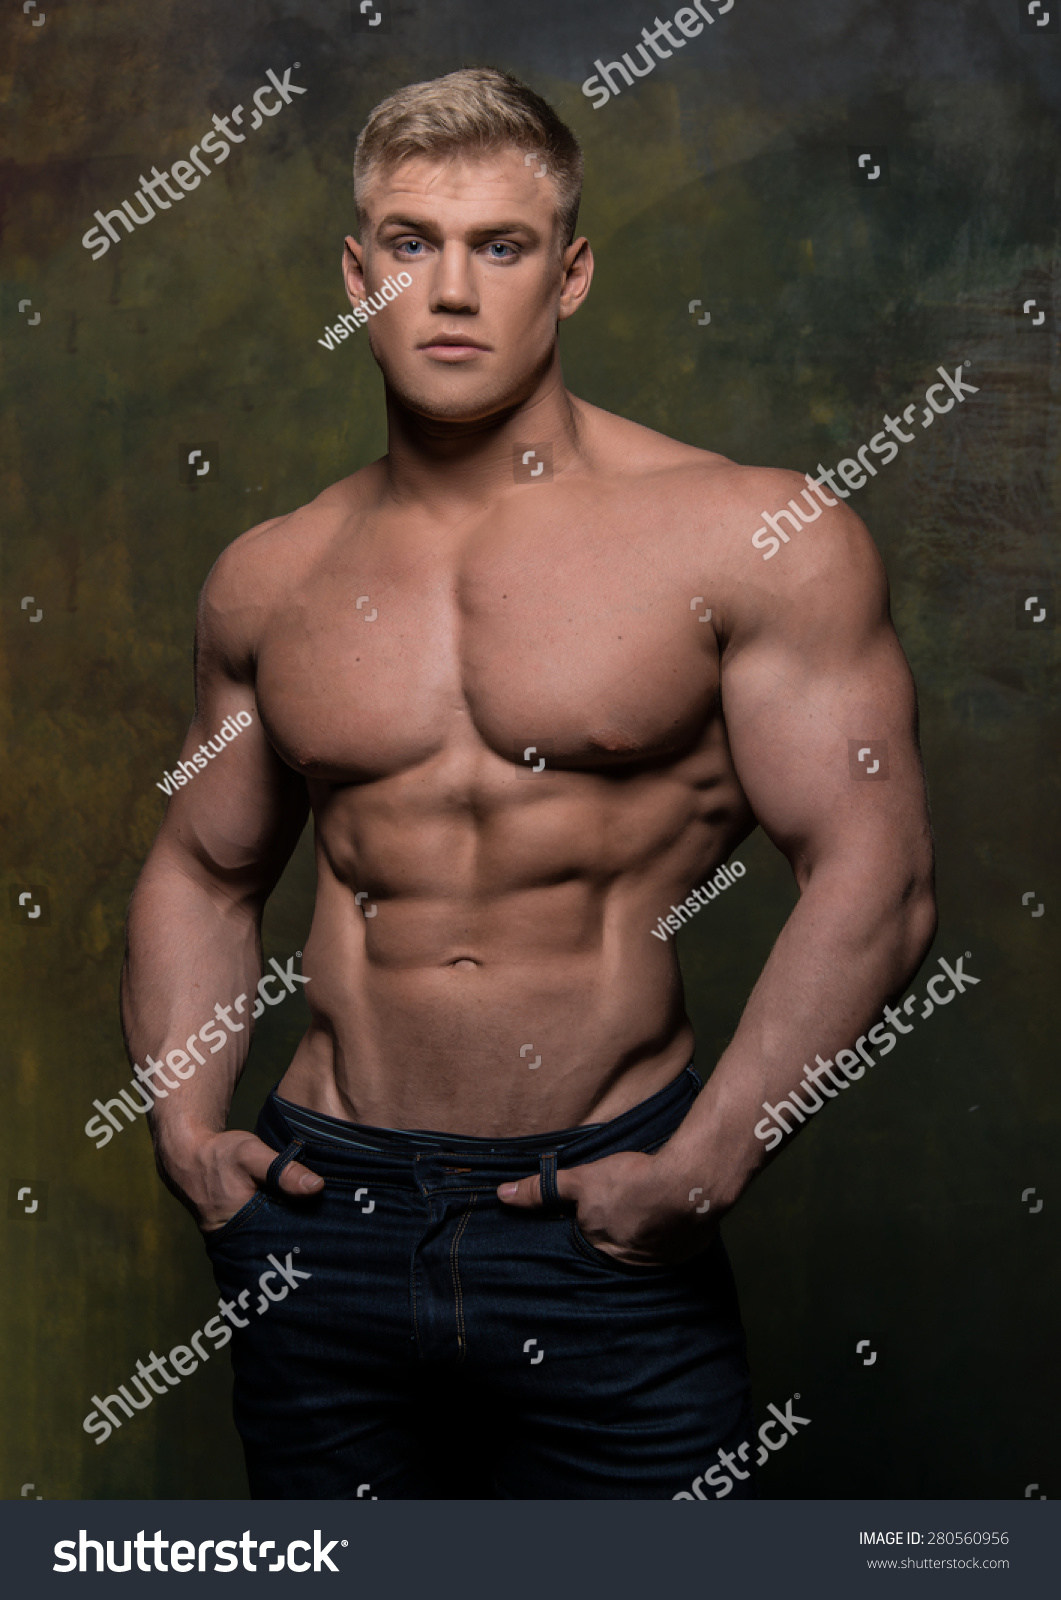 Fitness model stock photo. Image of muscle, pack, male 